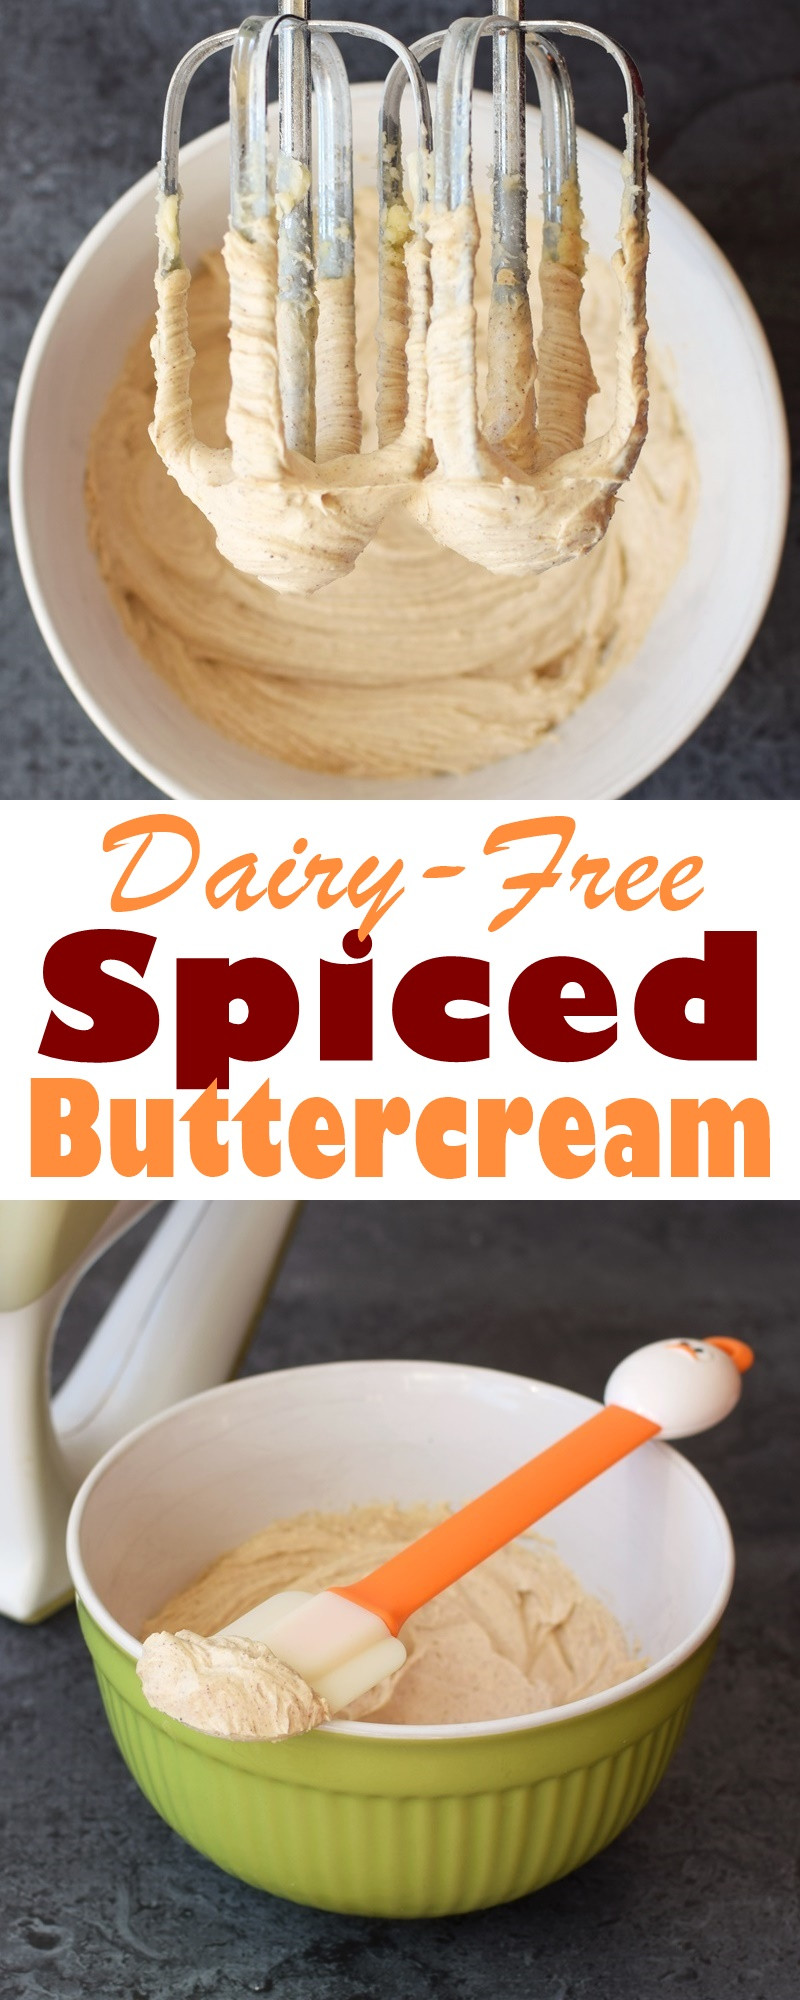 Dairy Free Frosting Recipes
 Spiced Buttercream Frosting Recipe Dairy Free & Soy Free